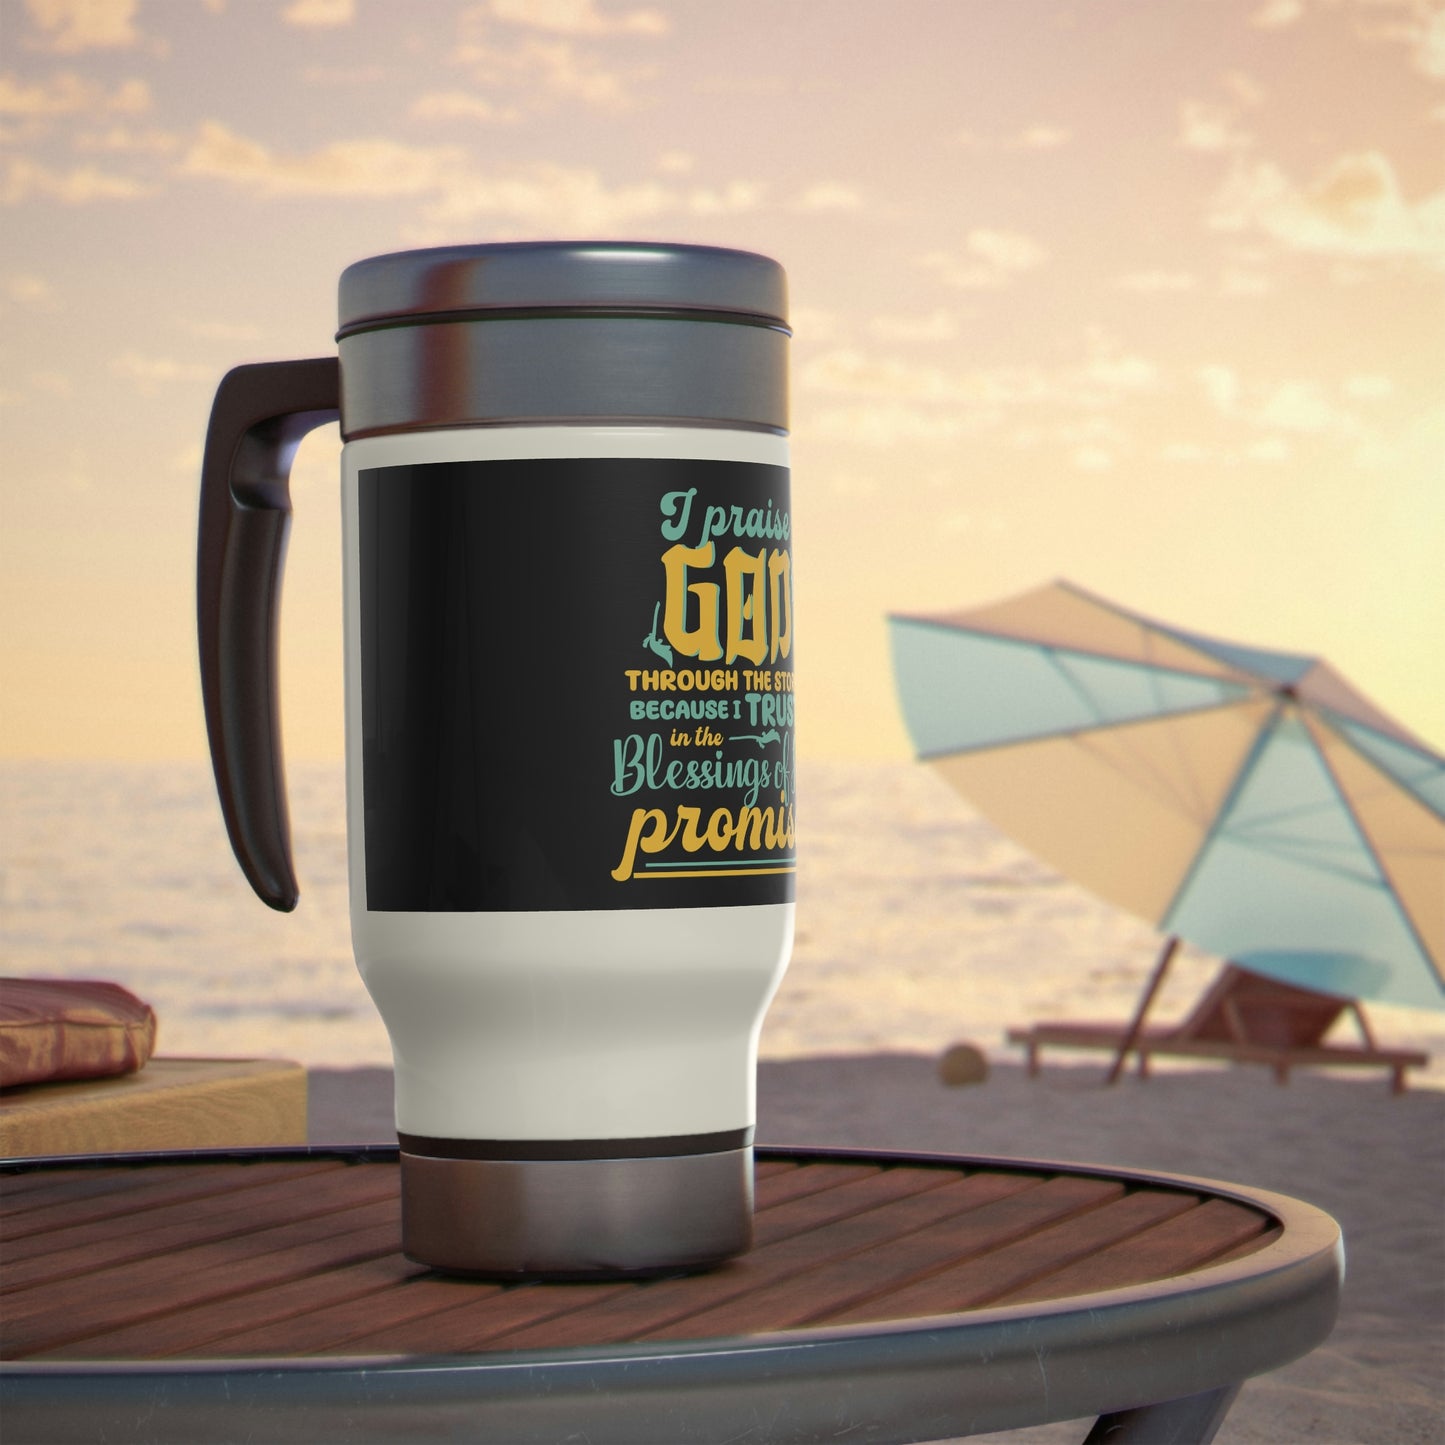 I Praise God Through The Storm Because I Trust In The Blessings Of His Promise Travel Mug with Handle, 14oz